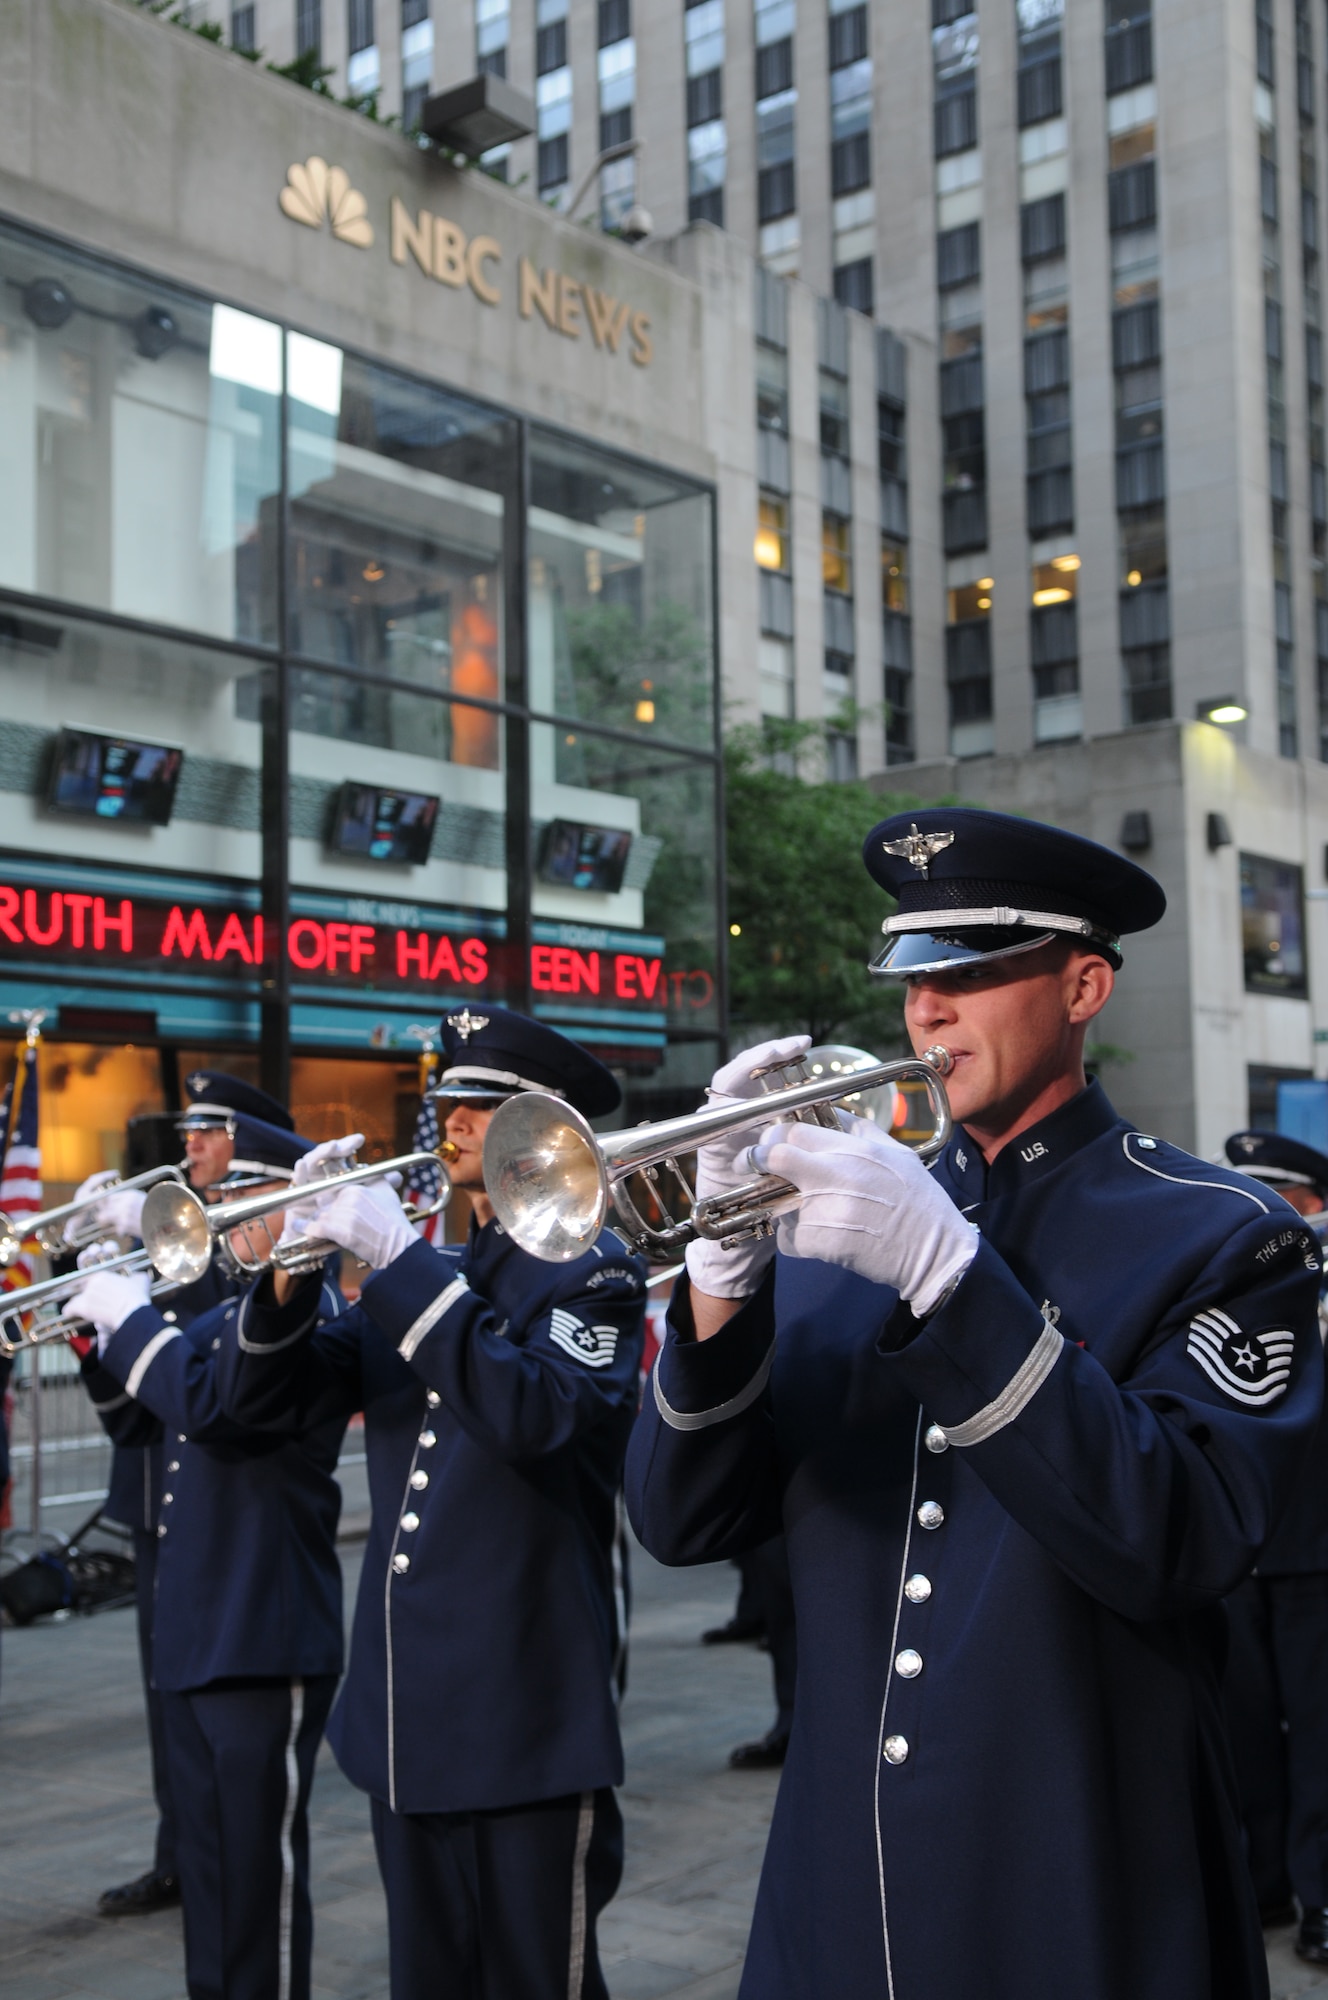 Trumpet players from the United States Air Force Band Ceremonial Brass perform for millions during a live Independence Day broadcast from Rockefeller Plaza in New York City. The Ceremonial Brass performed patriotic music and marches throughout the telecast, before and after commercial breaks. (U.S. Air Force photo by Senior Airman Marleah Miller)